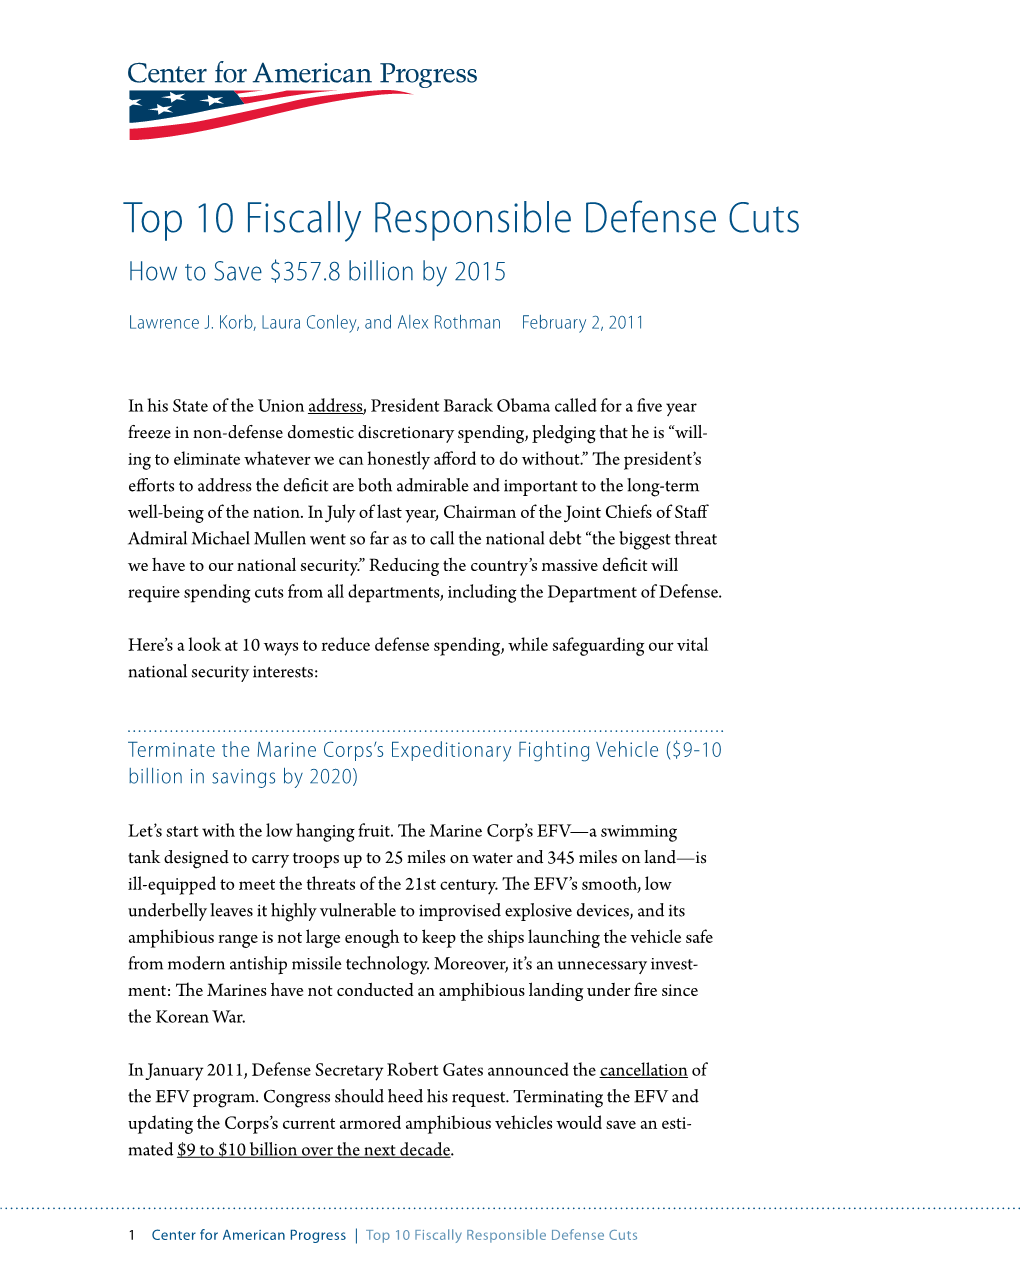 Top 10 Fiscally Responsible Defense Cuts How to Save $357.8 Billion by 2015